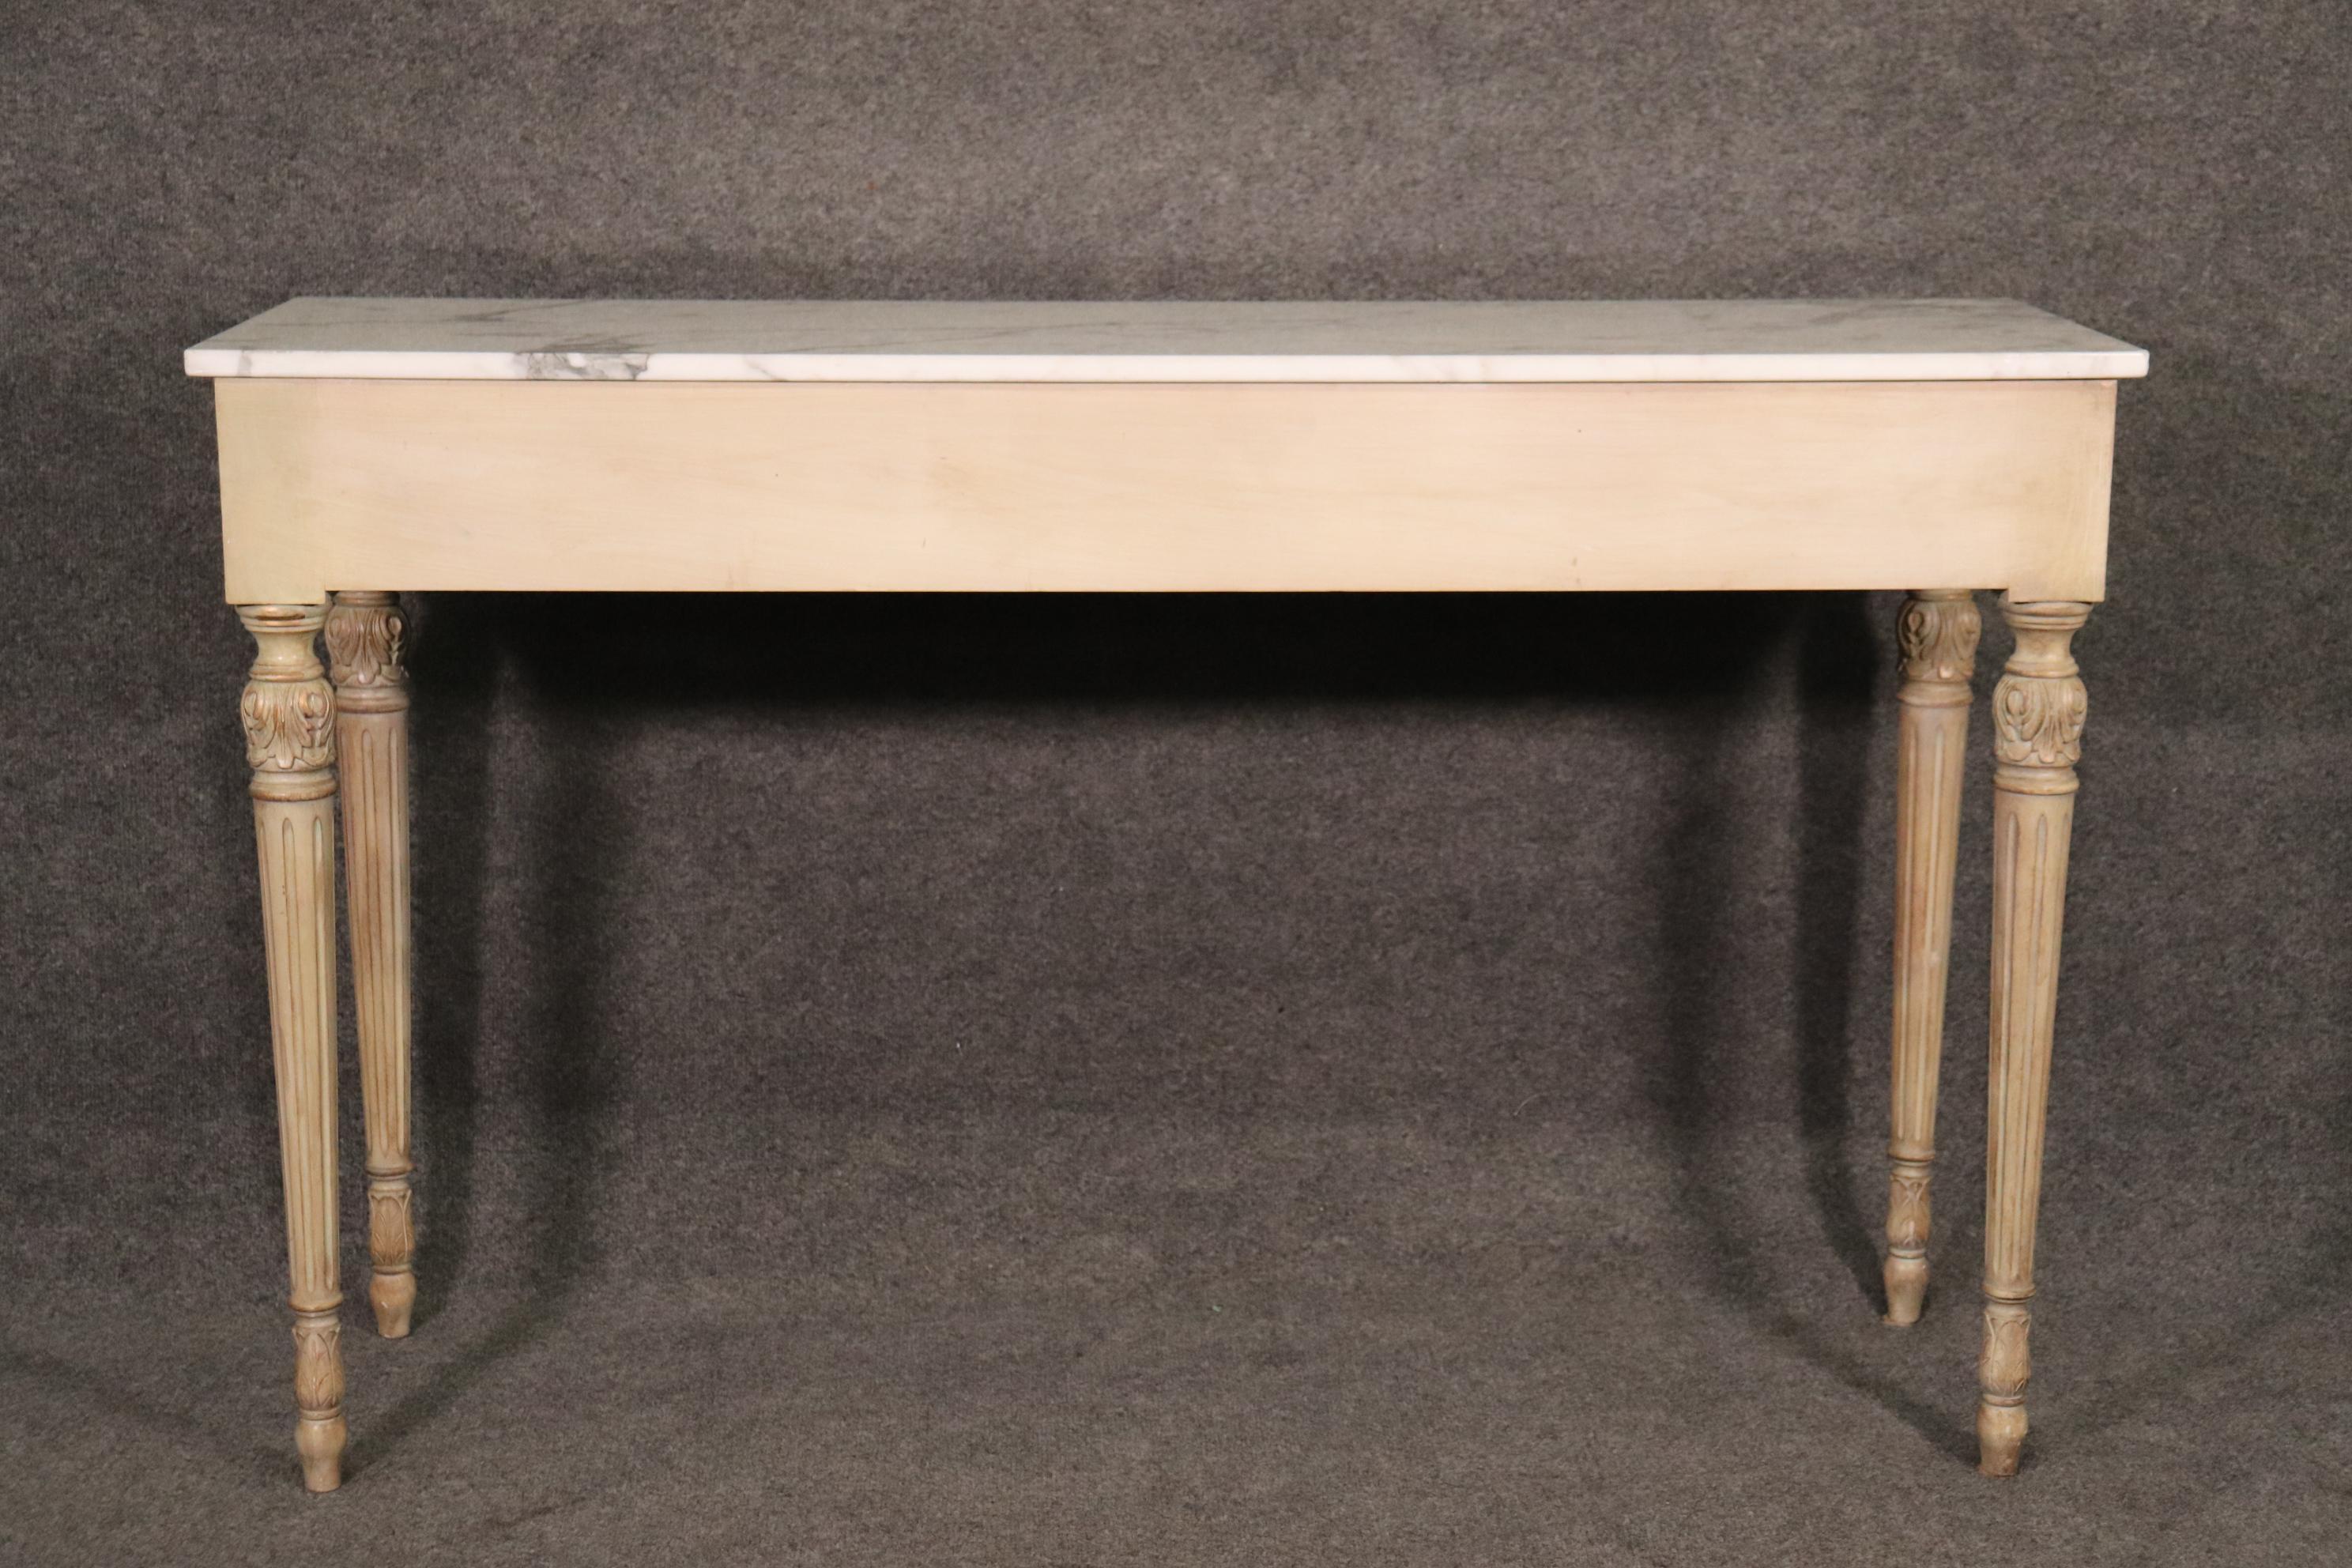 Walnut Fine French Louis XVI Marble Top Console Table with Glazed Finish circa 1920s